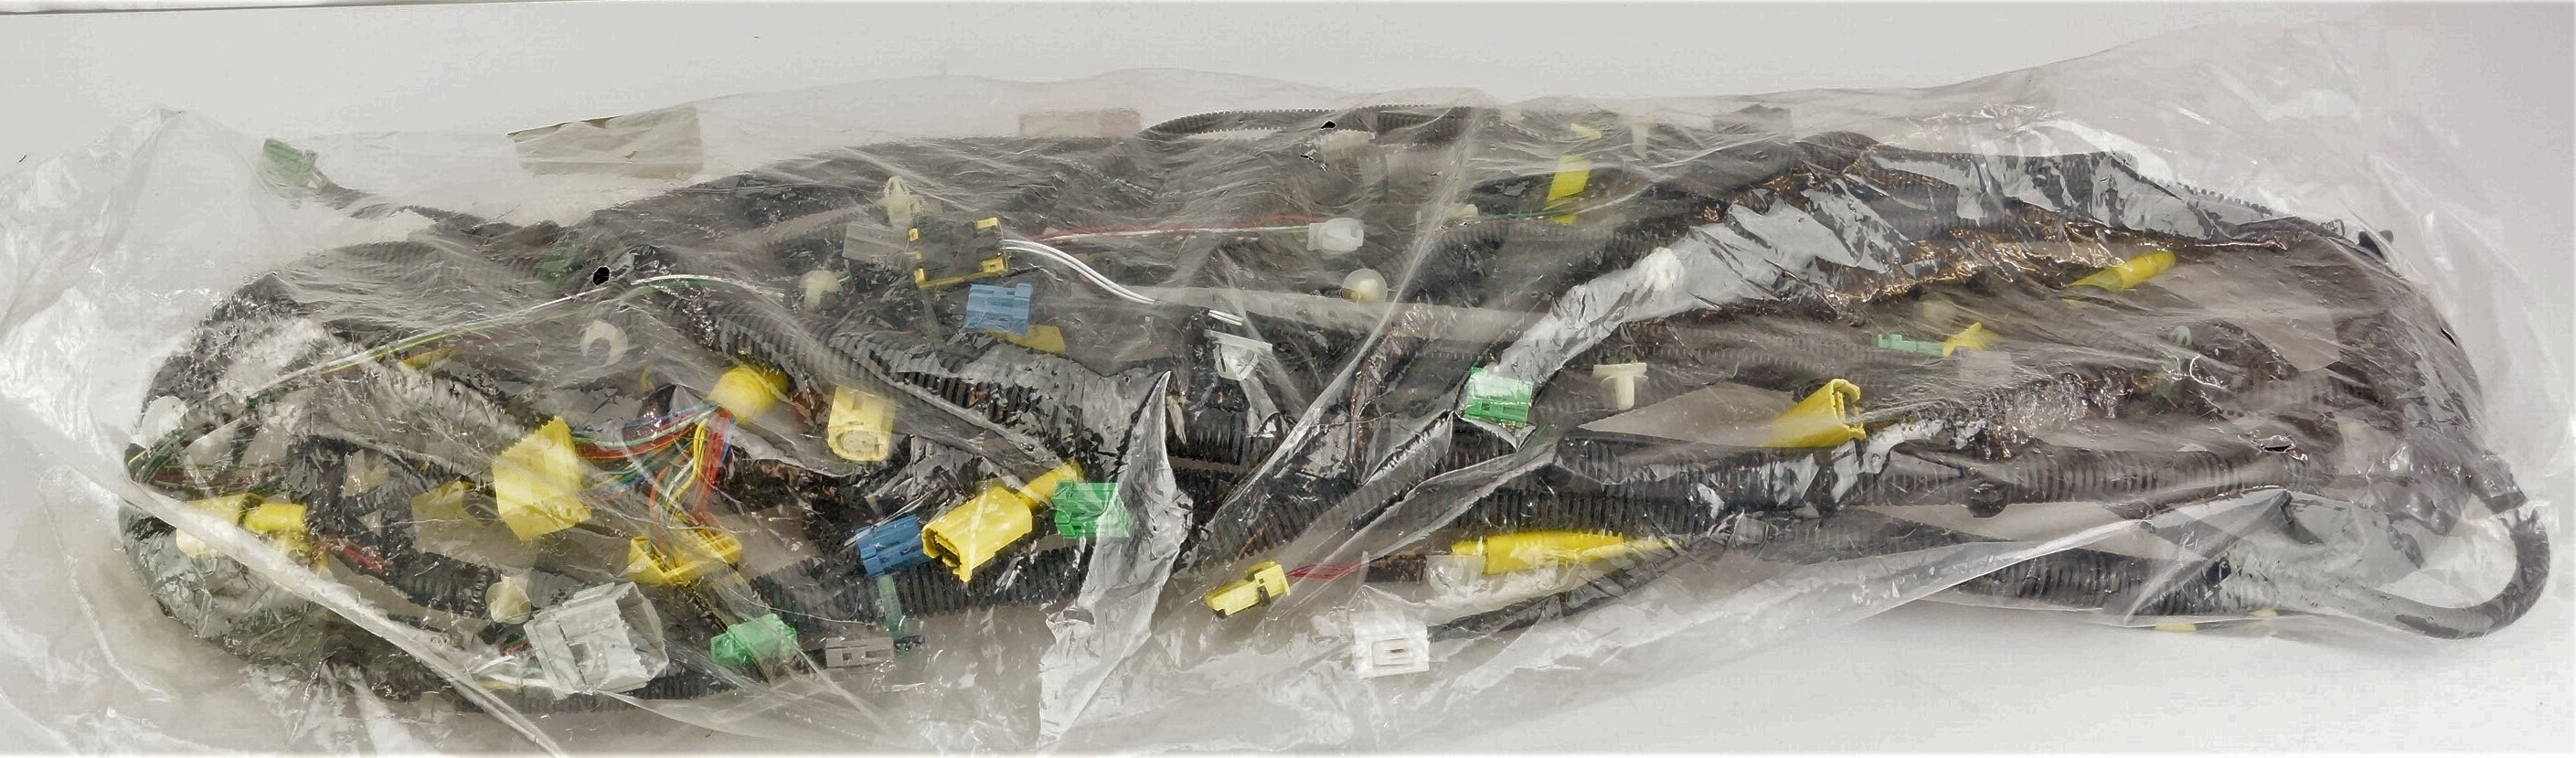 Genuine OEM 32107-SLN-407 Honda Floor Wire Harness for 2007-08 Fit Free Shipping - image 2